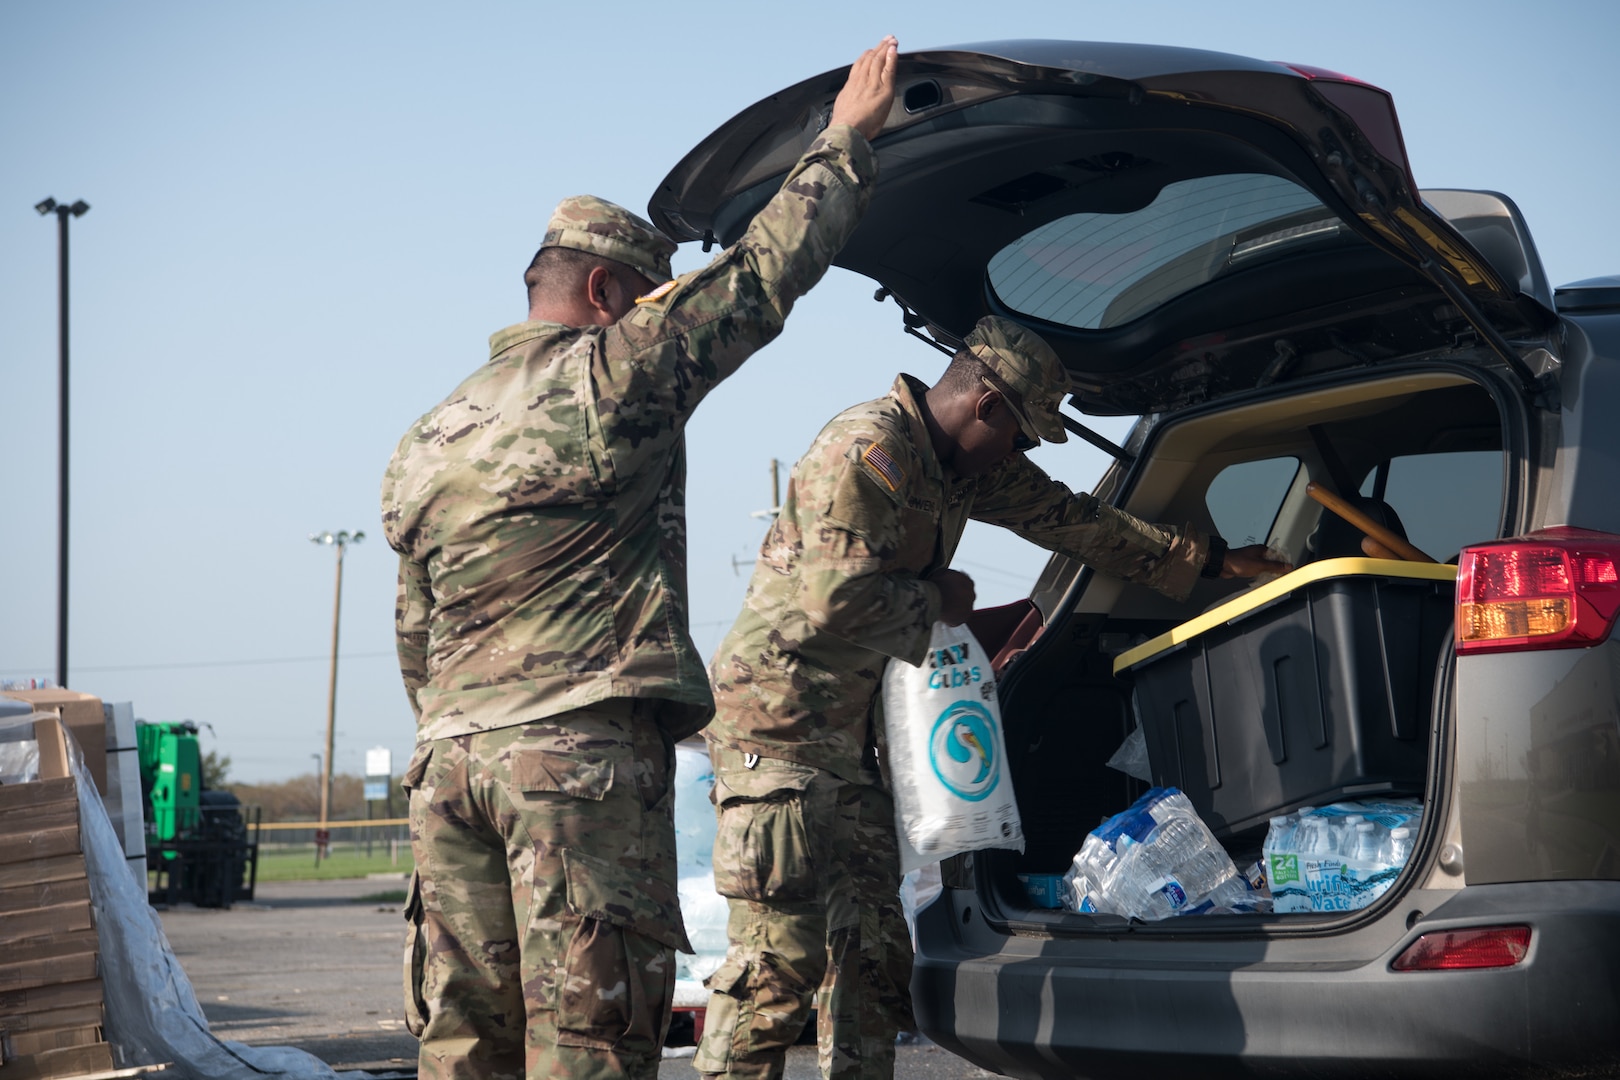 Sgt. 1st Class Charles Spalding (left), a platoon sergeant with the 3120th Engineer Company, and Spc. Terrelle Bowens (right), a signal support systems specialist with the 205th Signal Company, both members of the Oklahoma Army National Guard, distribute supplies to citizens at a point of distribution site in Reserve, Louisiana, Sept. 5, 2021. The Oklahoma National Guard is operating 13 PODs across seven parishes that supply local families with tarps, meals ready to eat, ice and water as part of Hurricane Ida relief efforts. (Oklahoma National Guard photo by Senior Airman Alex Kaelke)